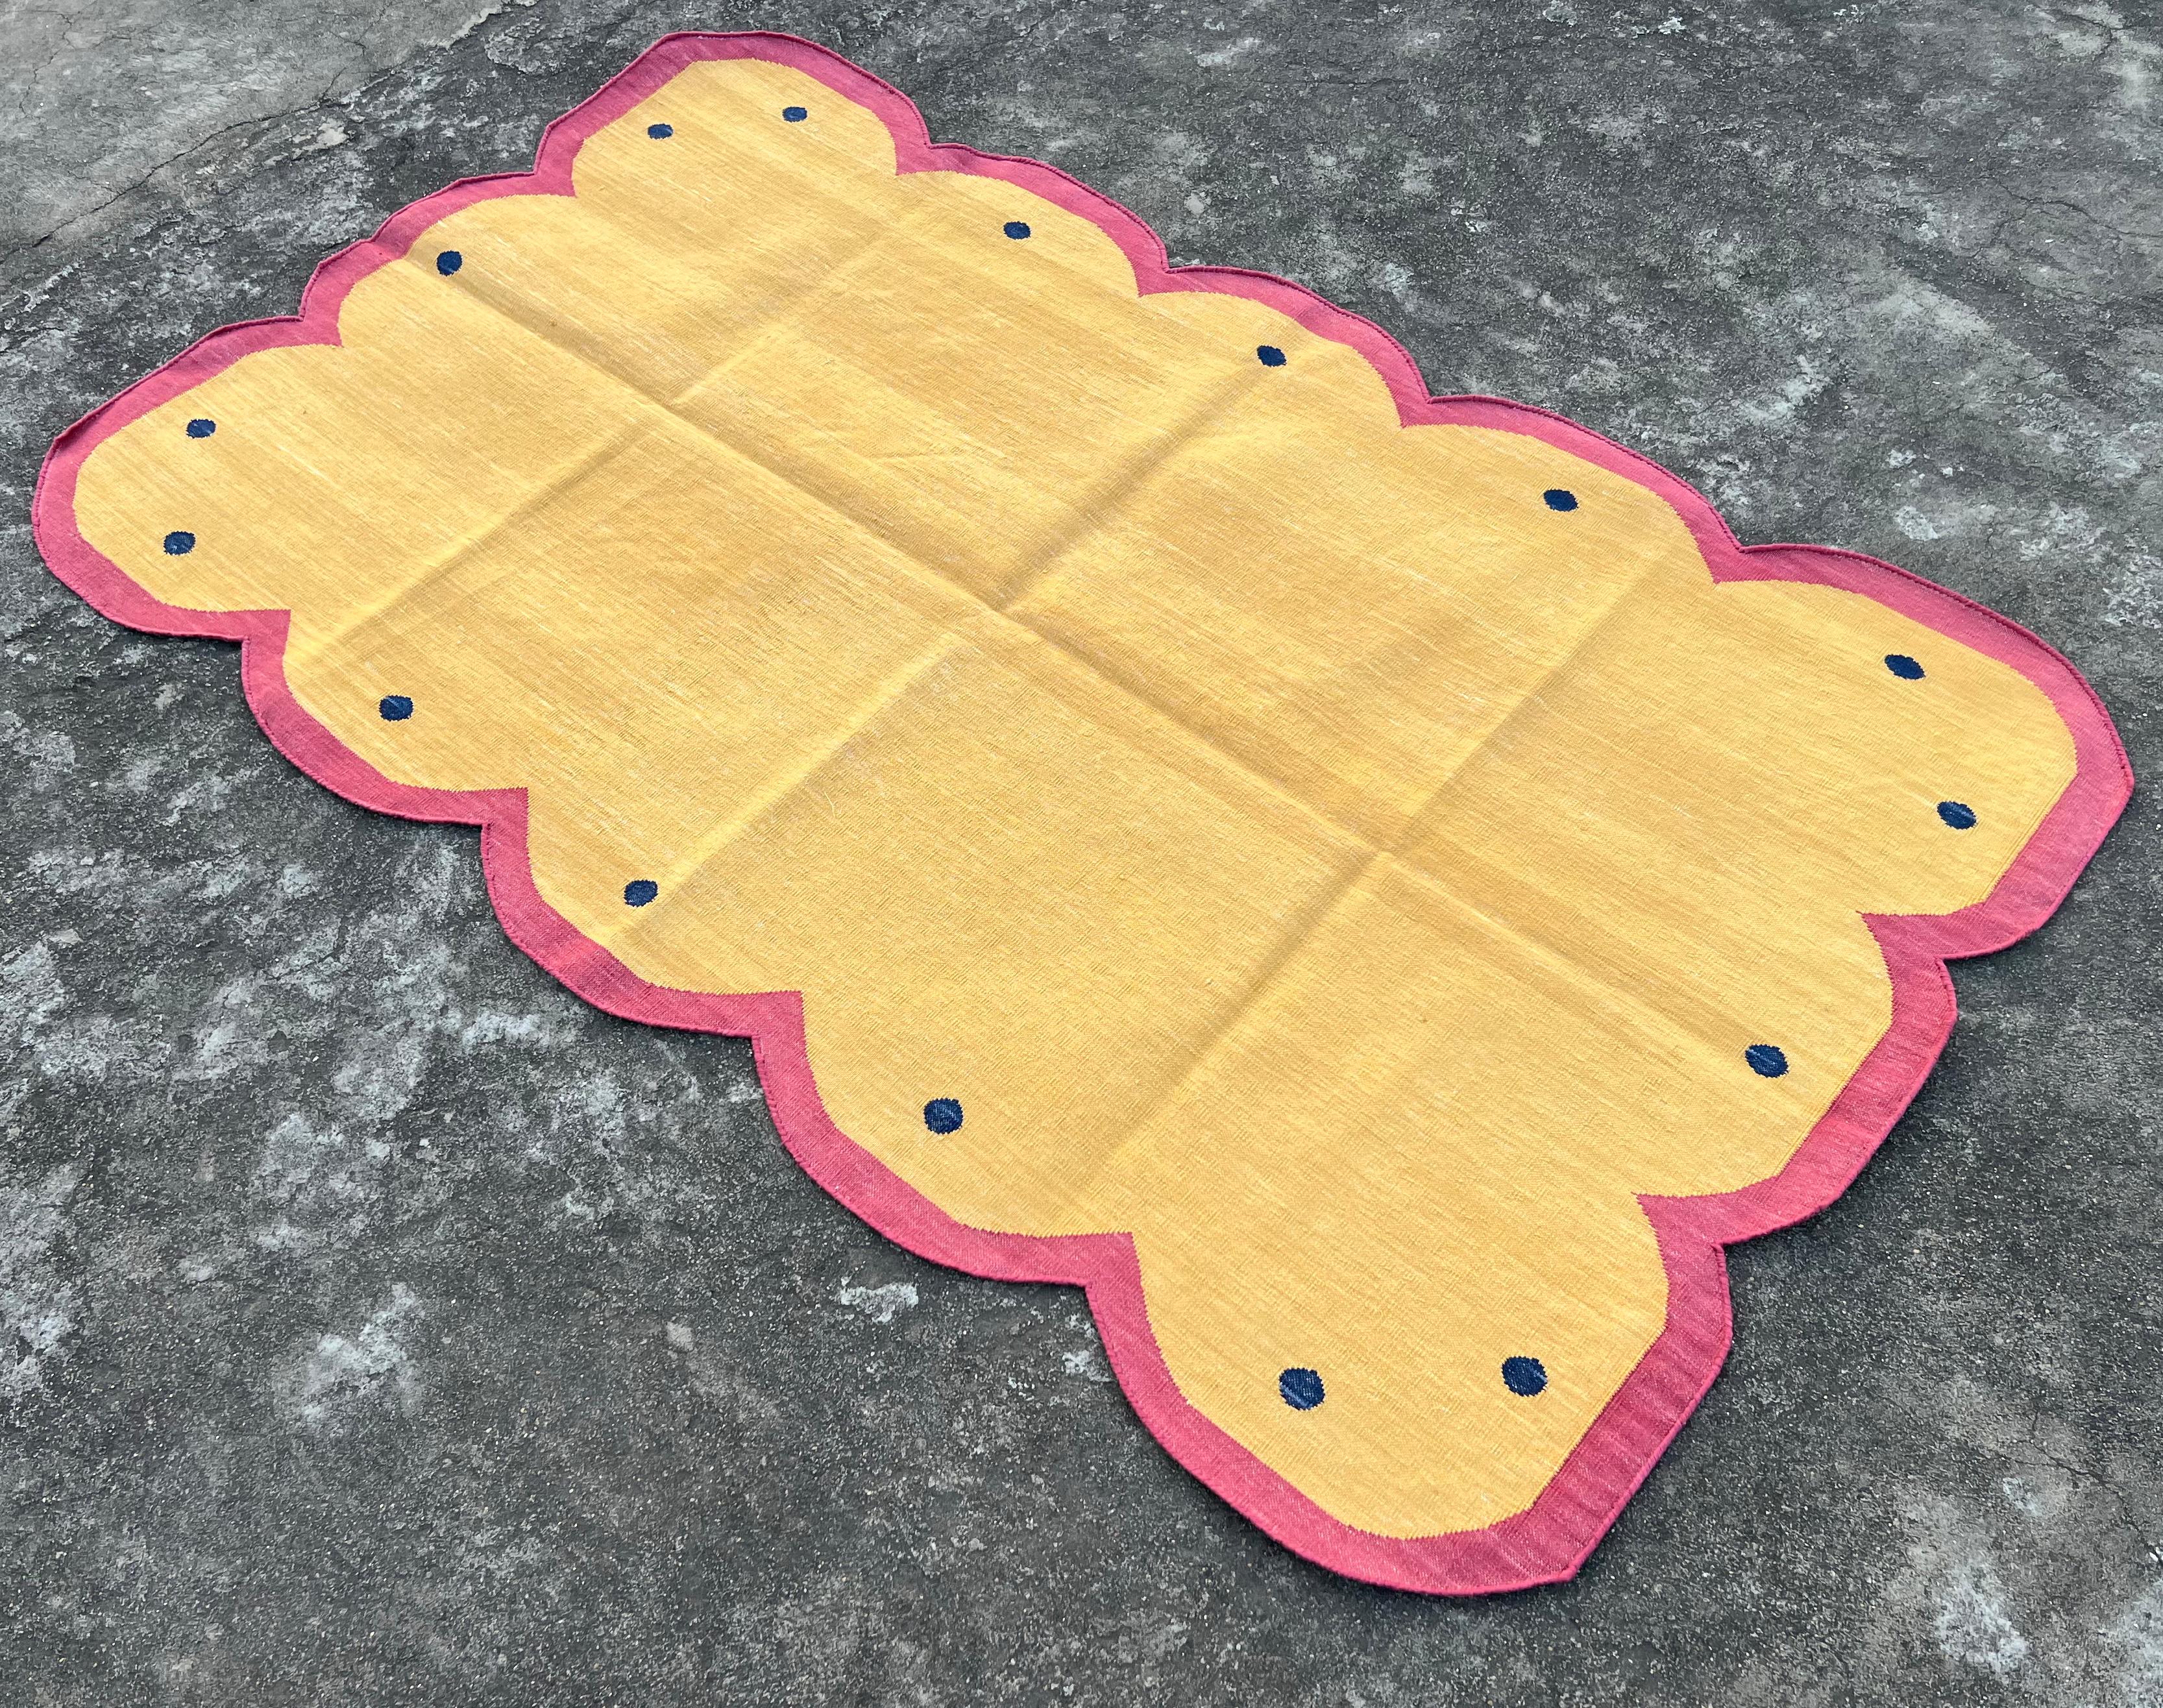 Cotton Vegetable Dyed Yellow And Pink Scalloped Striped Indian Dhurrie Rug-3'x5' 
These special flat-weave dhurries are hand-woven with 15 ply 100% cotton yarn. Due to the special manufacturing techniques used to create our rugs, the size and color